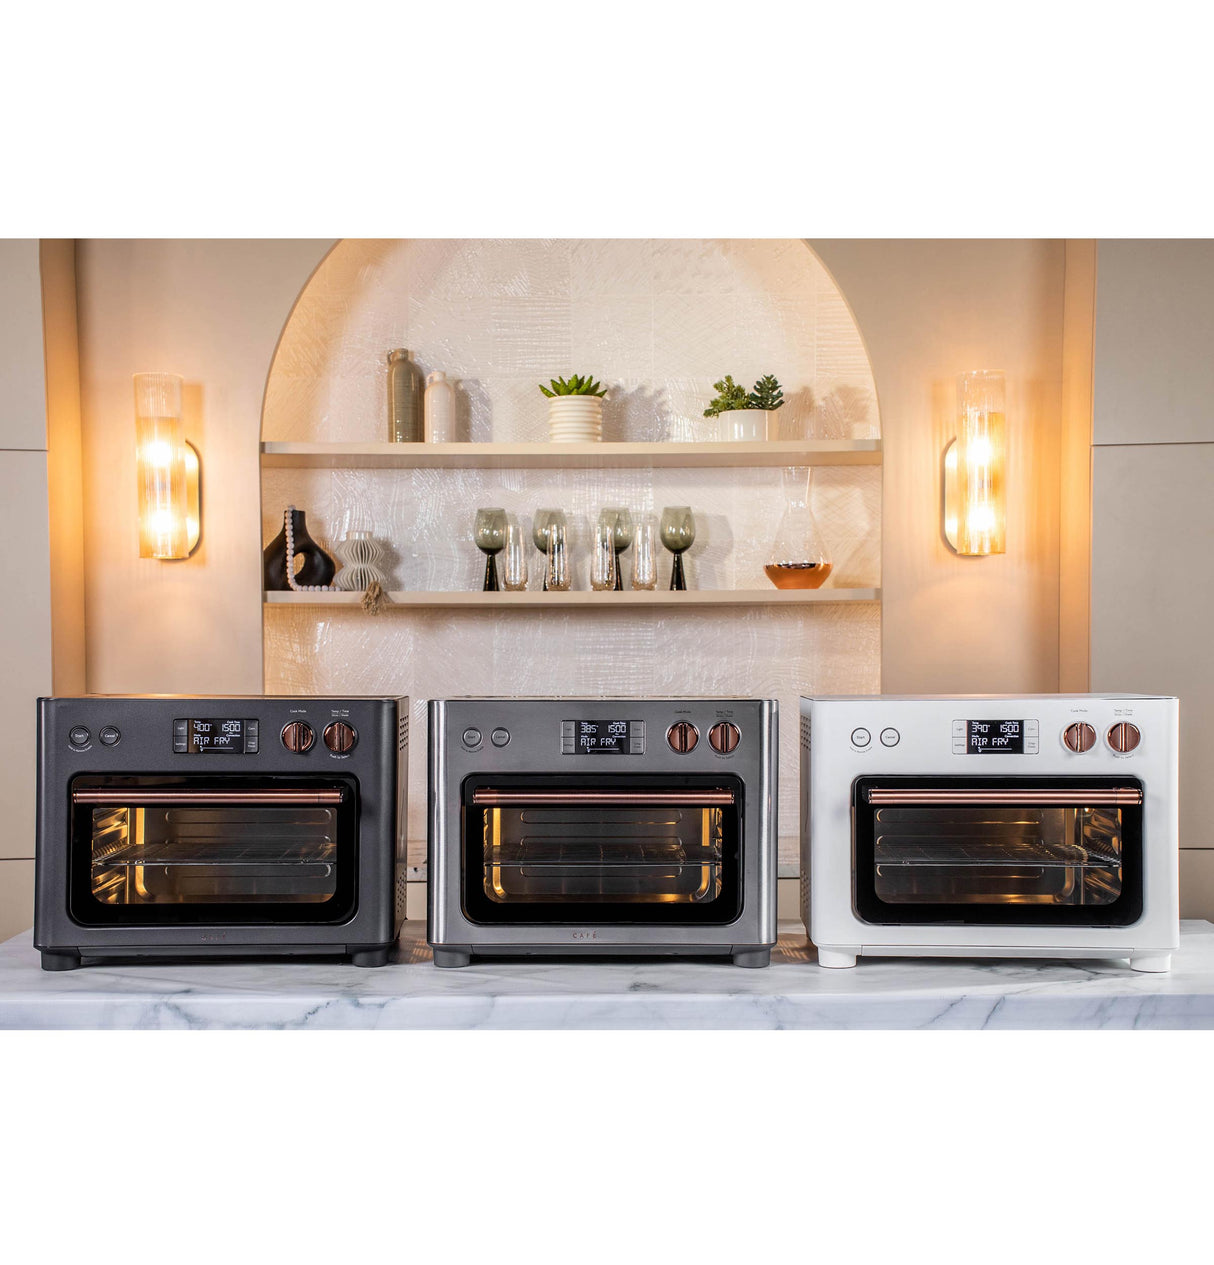 Caf(eback)(TM) Couture(TM) Oven with Air Fry - (C9OAAAS4RW3)